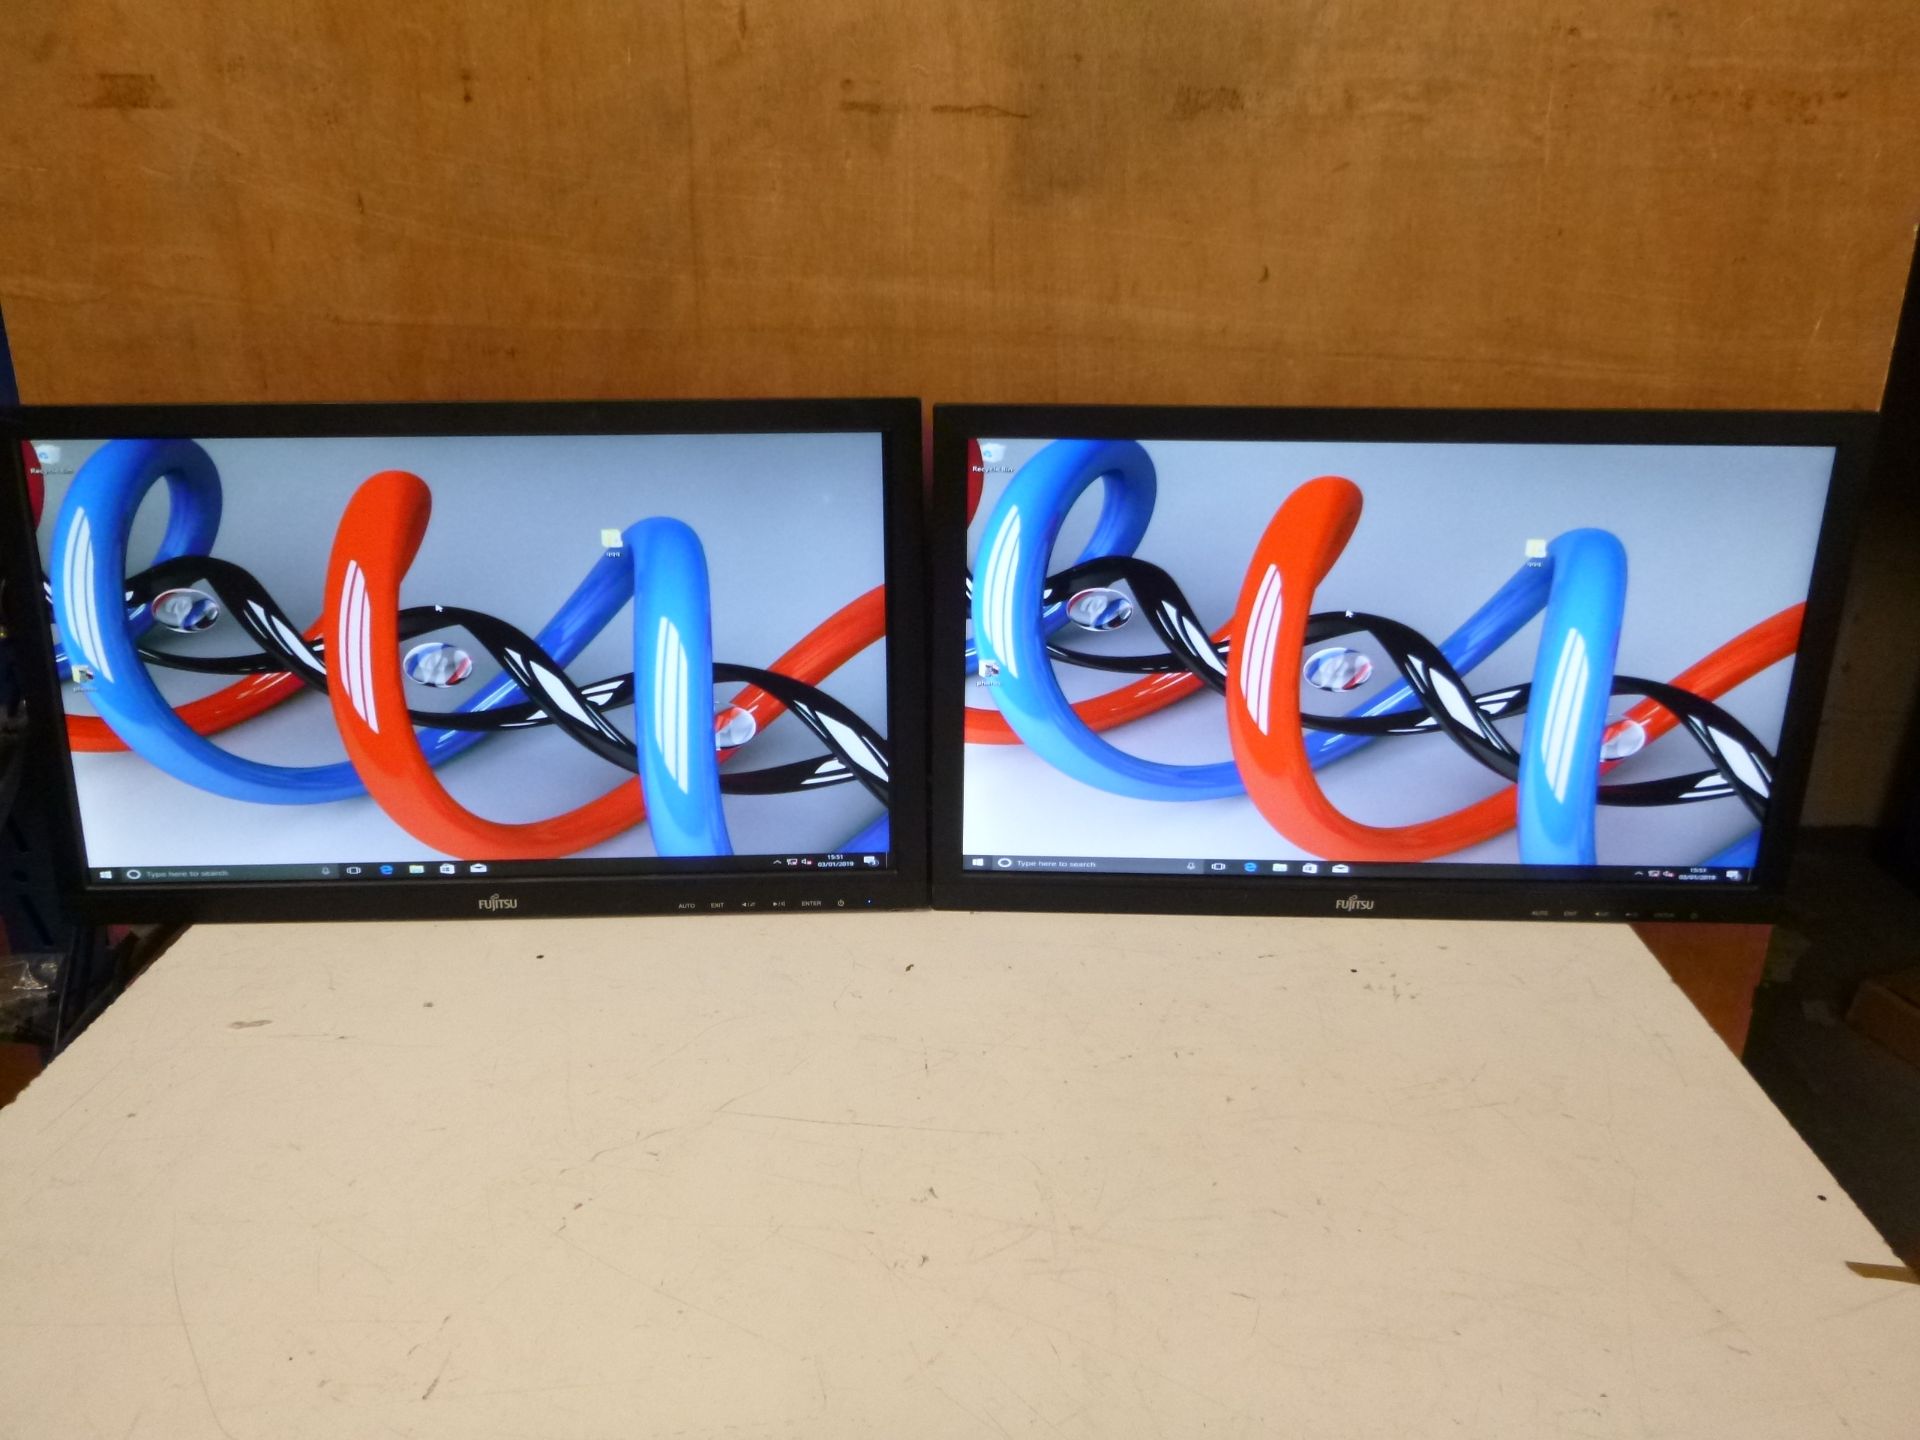 PAIR OF FUJITSU 20" LCD SCREENS . MODEL W2013 WITHOUT STANDS. EACH HAS DVI & VGA SEE PHOTOS.